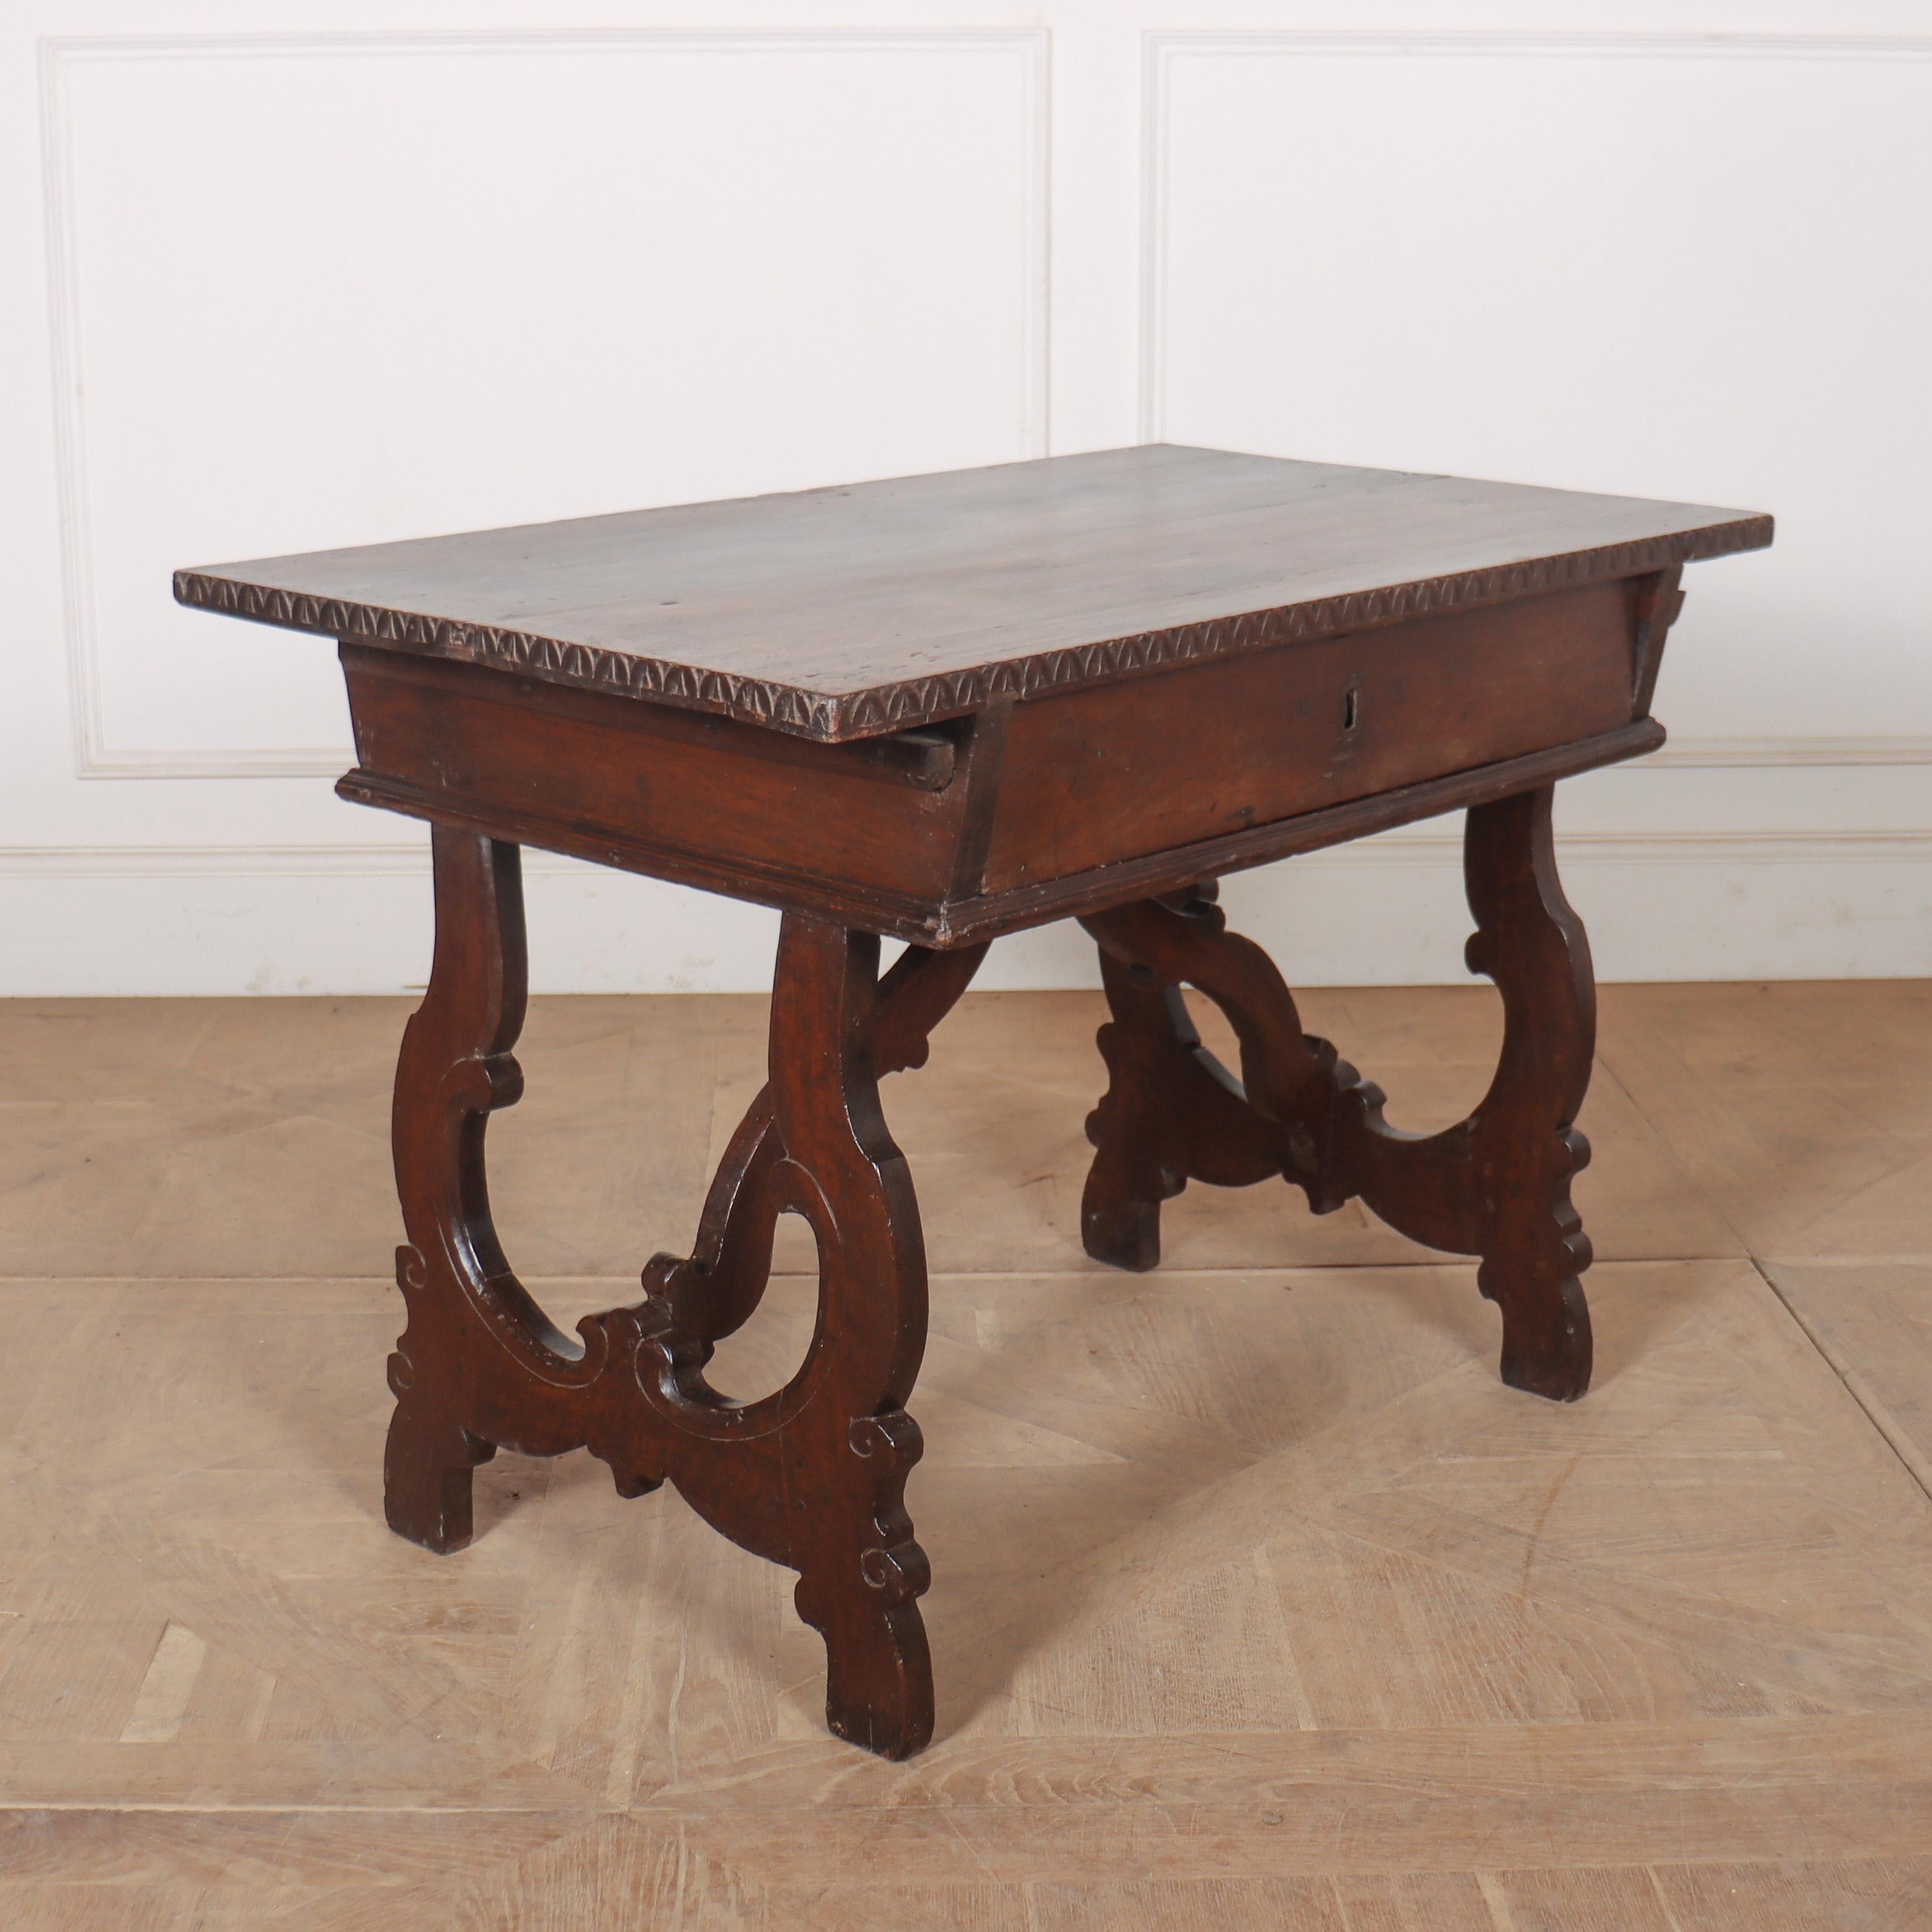 Italian Walnut Lamp Table In Good Condition For Sale In Leamington Spa, Warwickshire